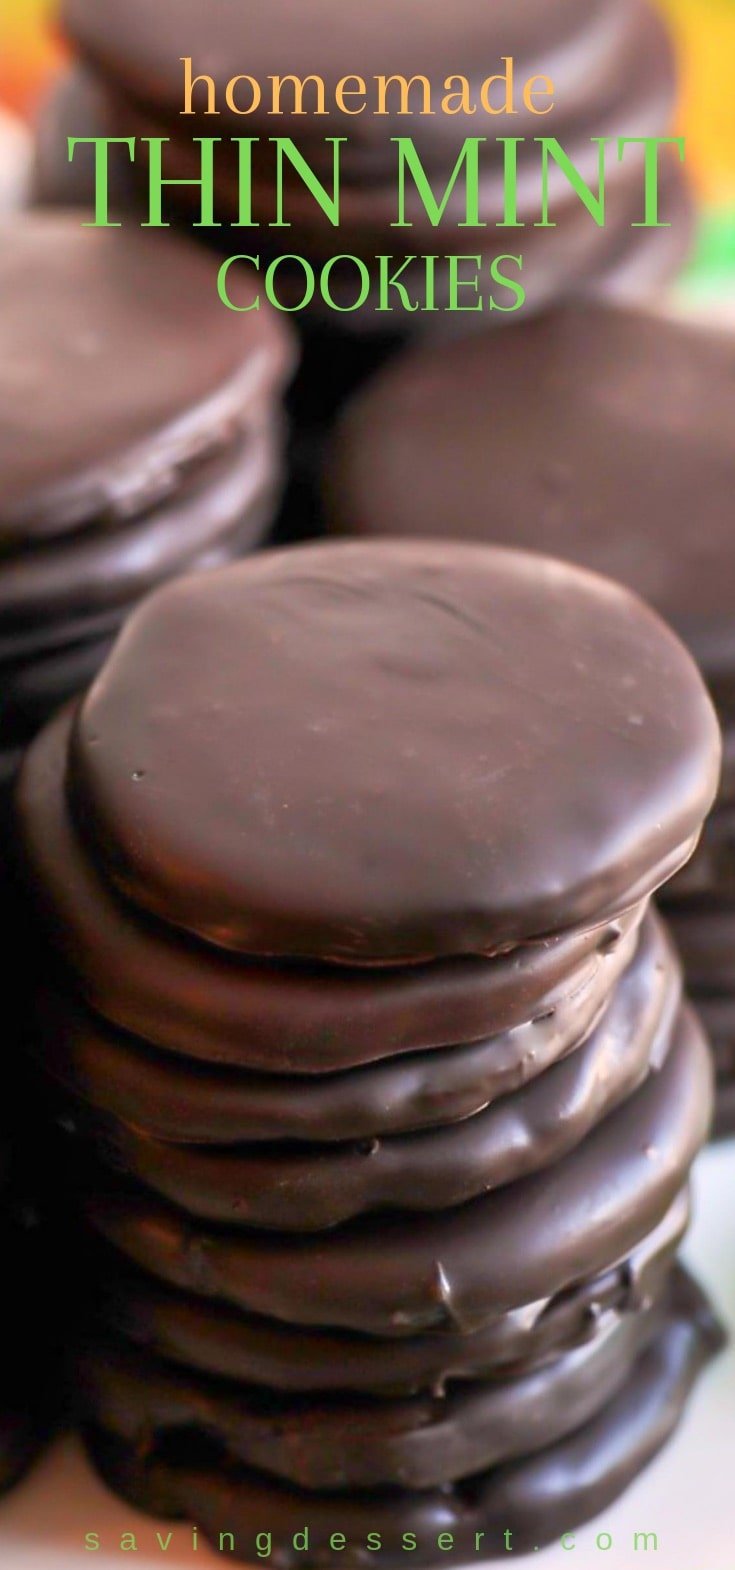 Stacks of homemade Thin Mint Cookies